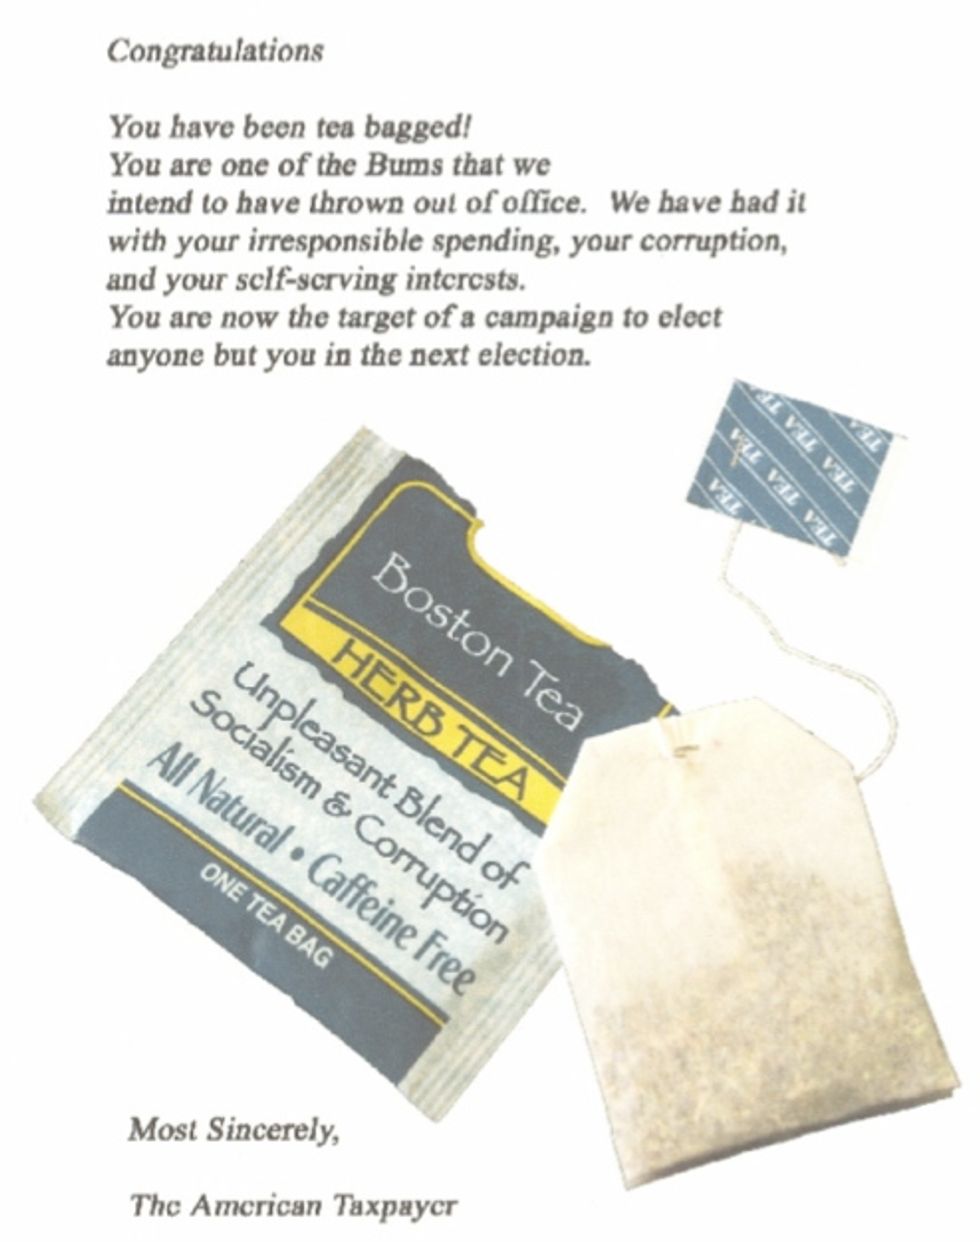 Did You Taxpayers Know That You Wrote This Teabag Letter?